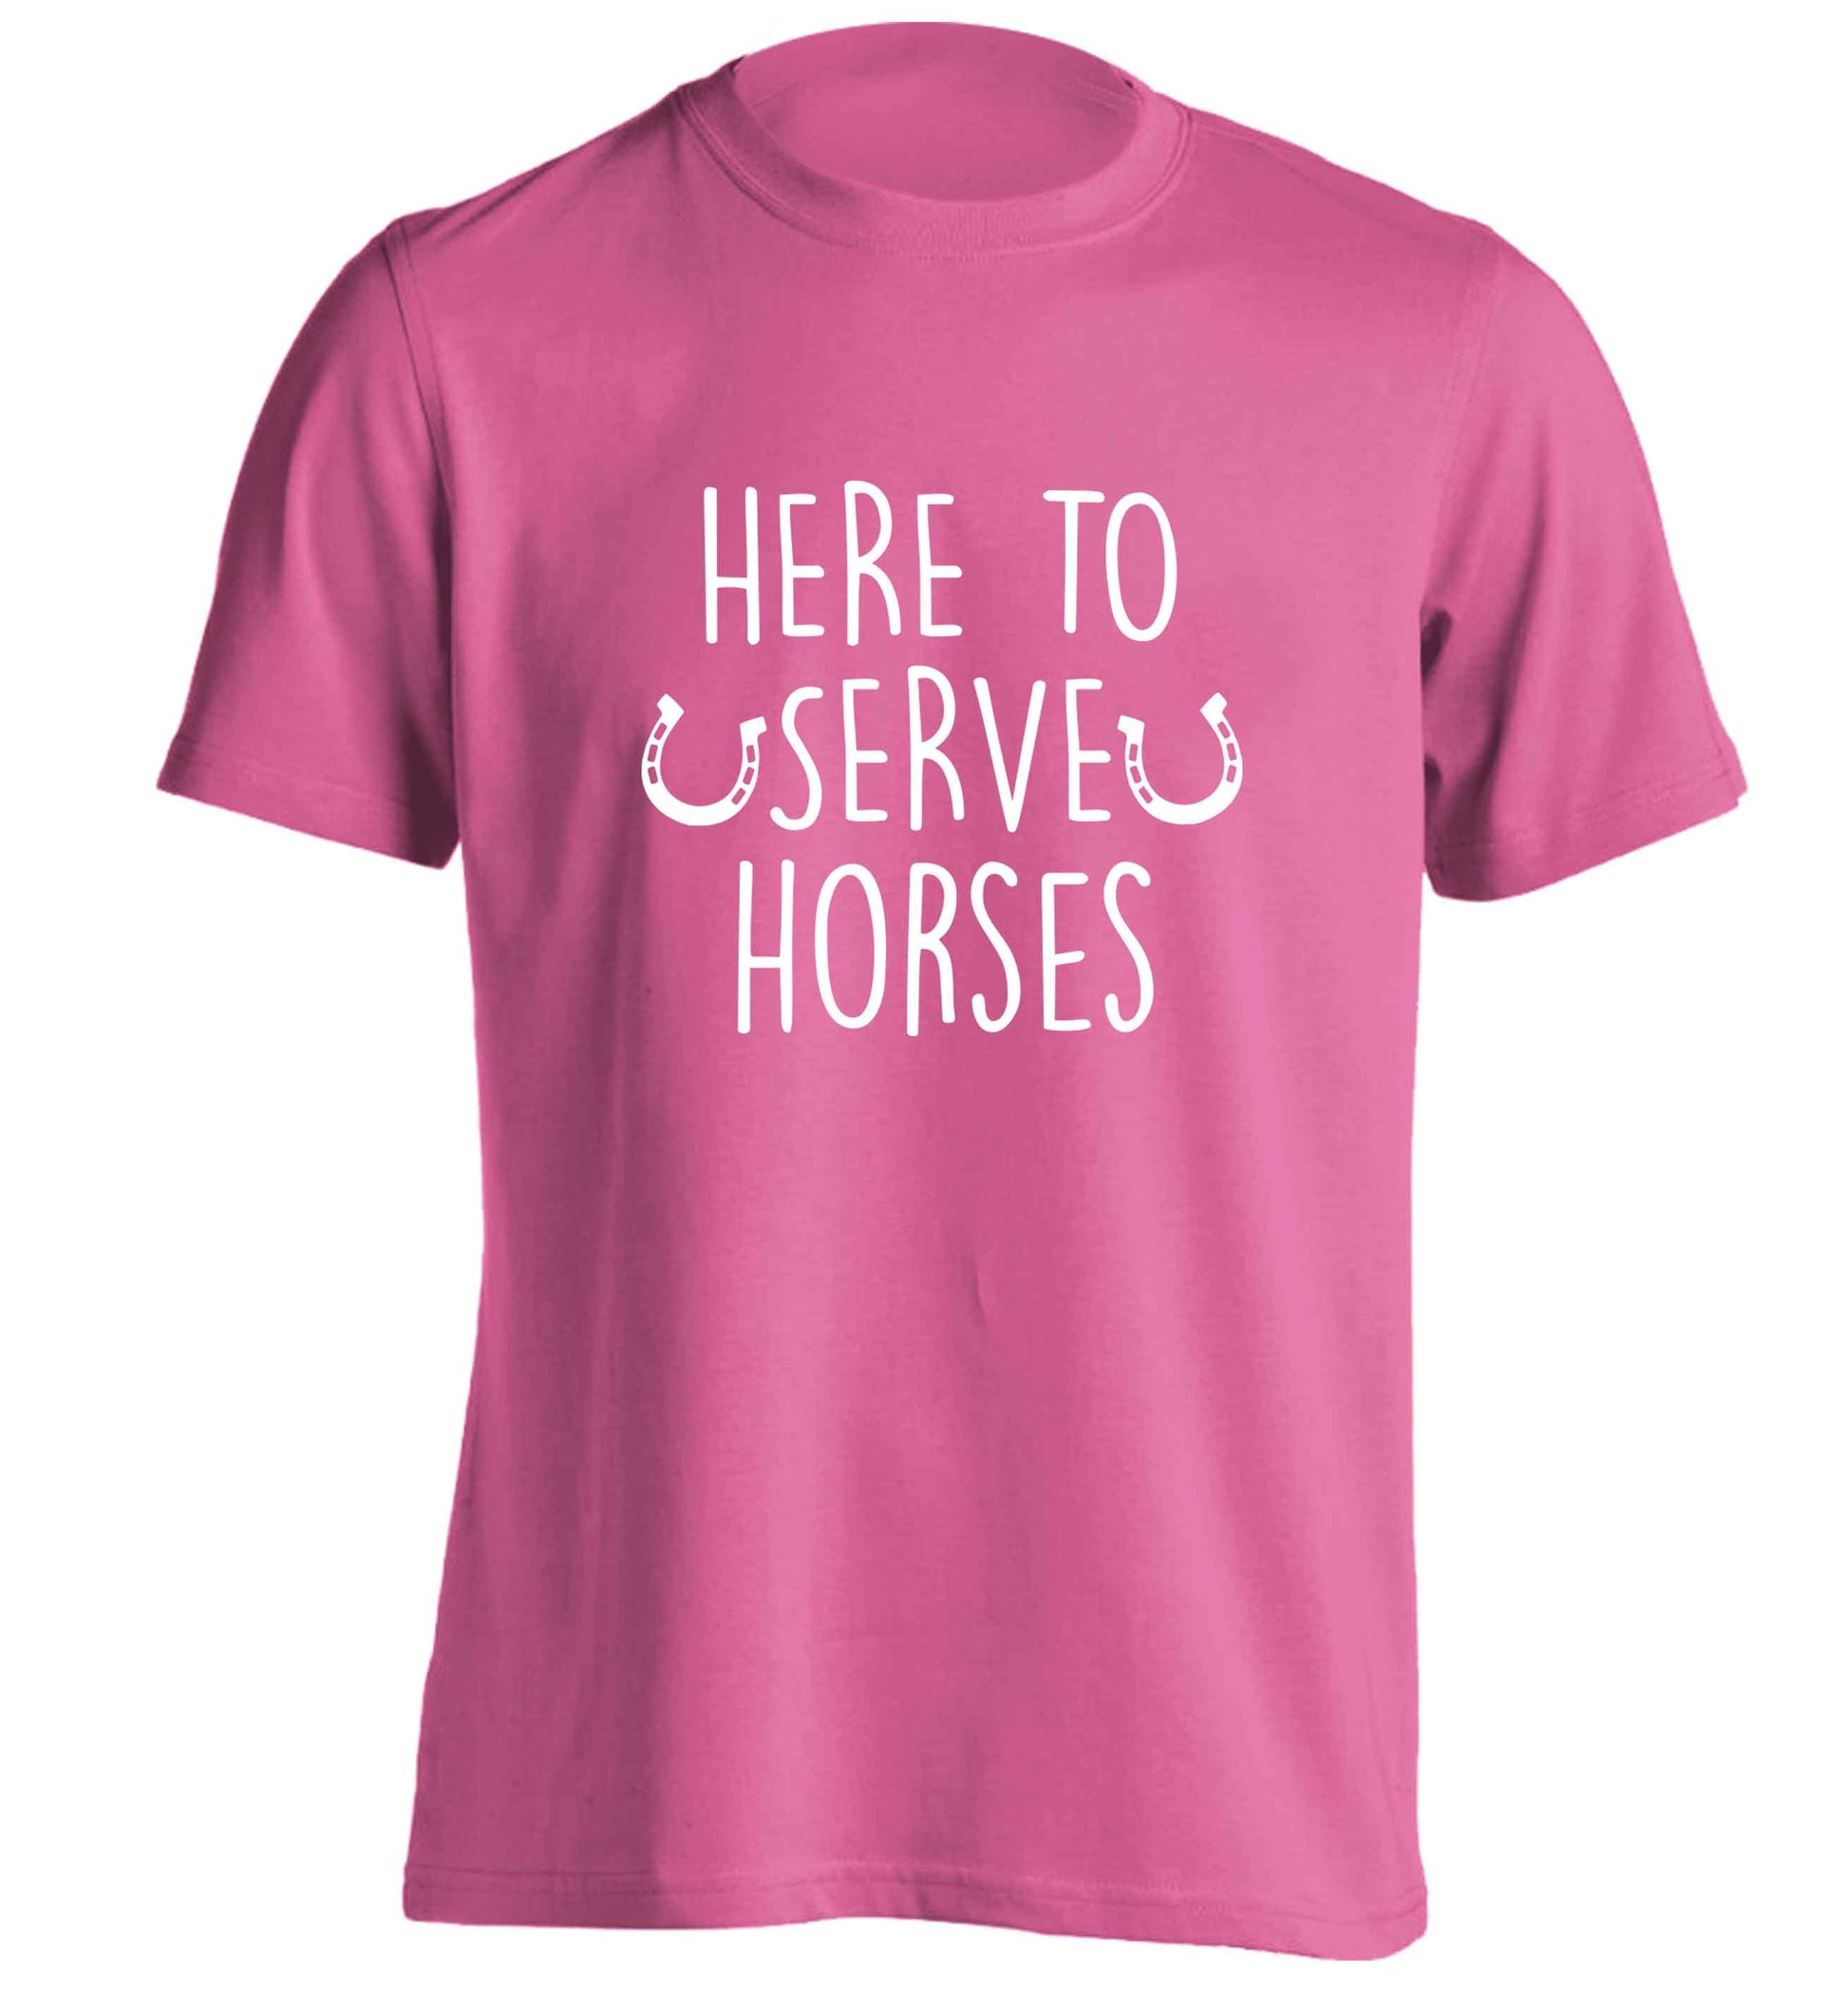 Here to serve horses adults unisex pink Tshirt 2XL